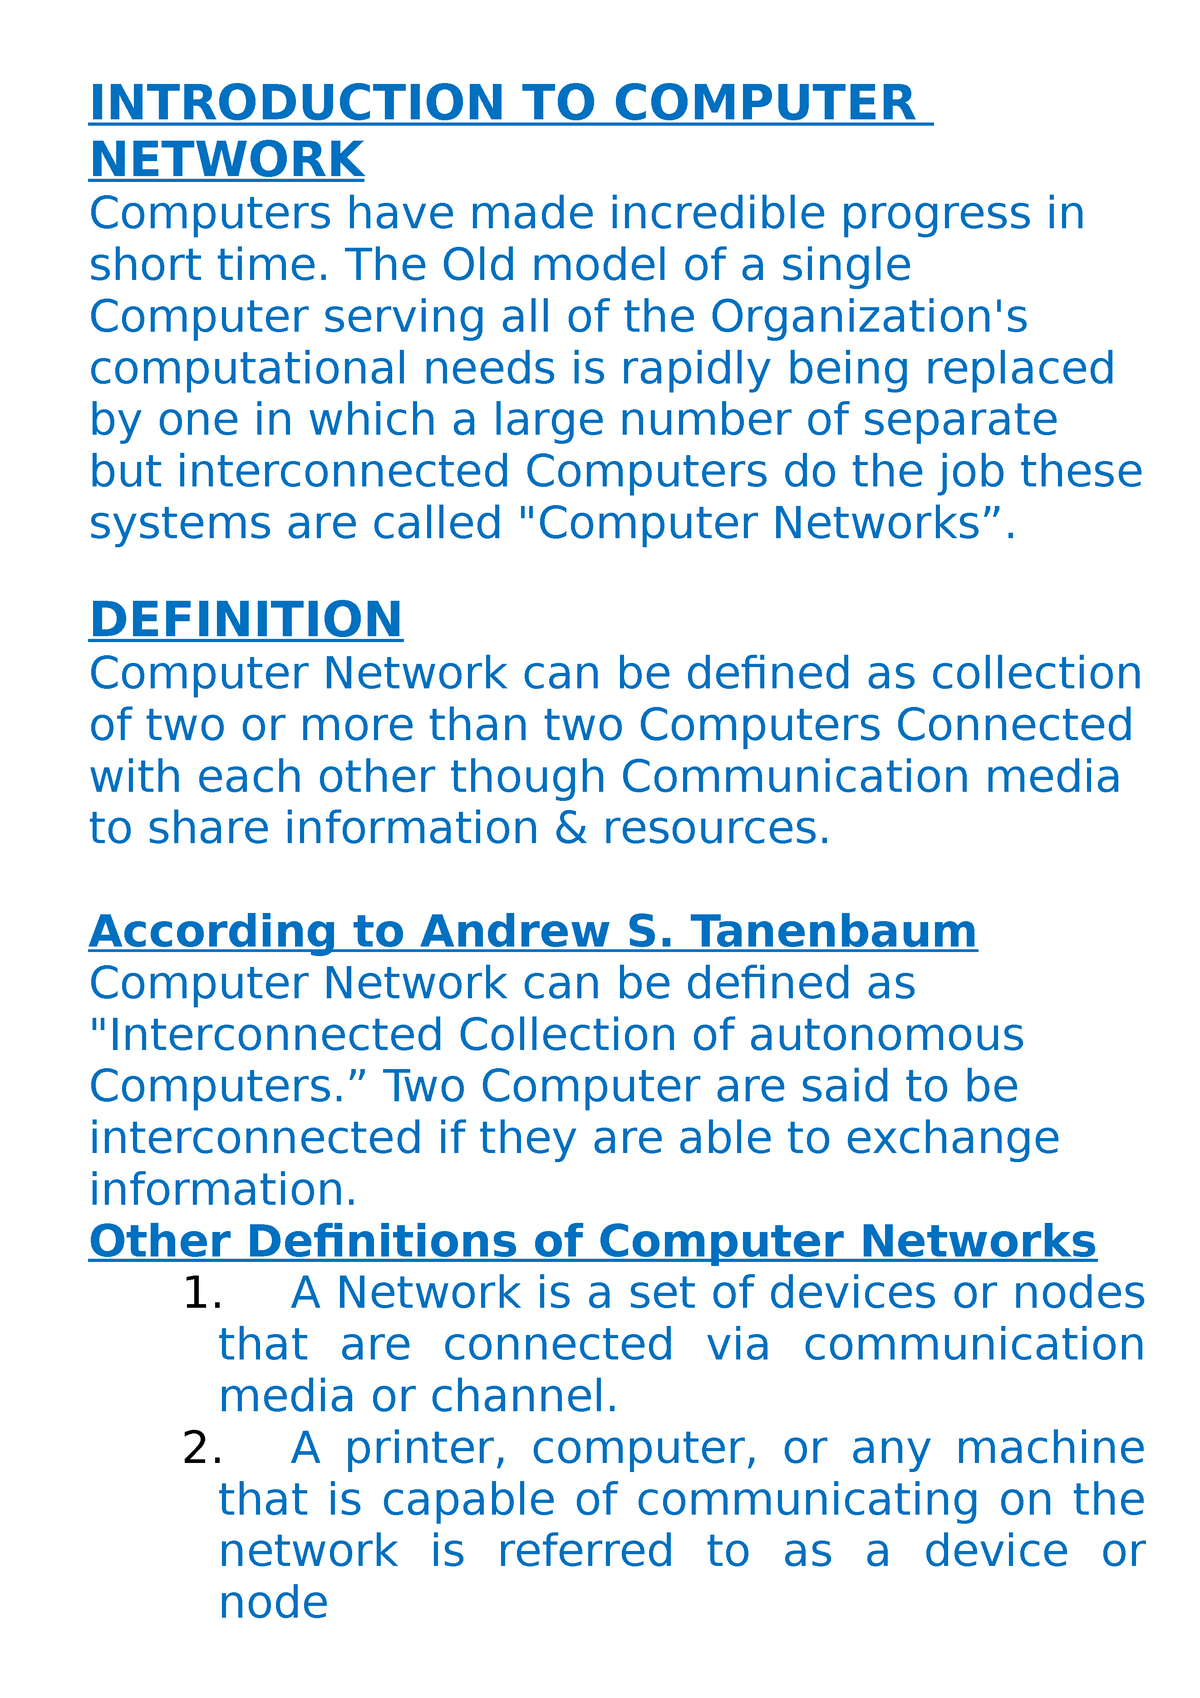 research paper topics related to computer network